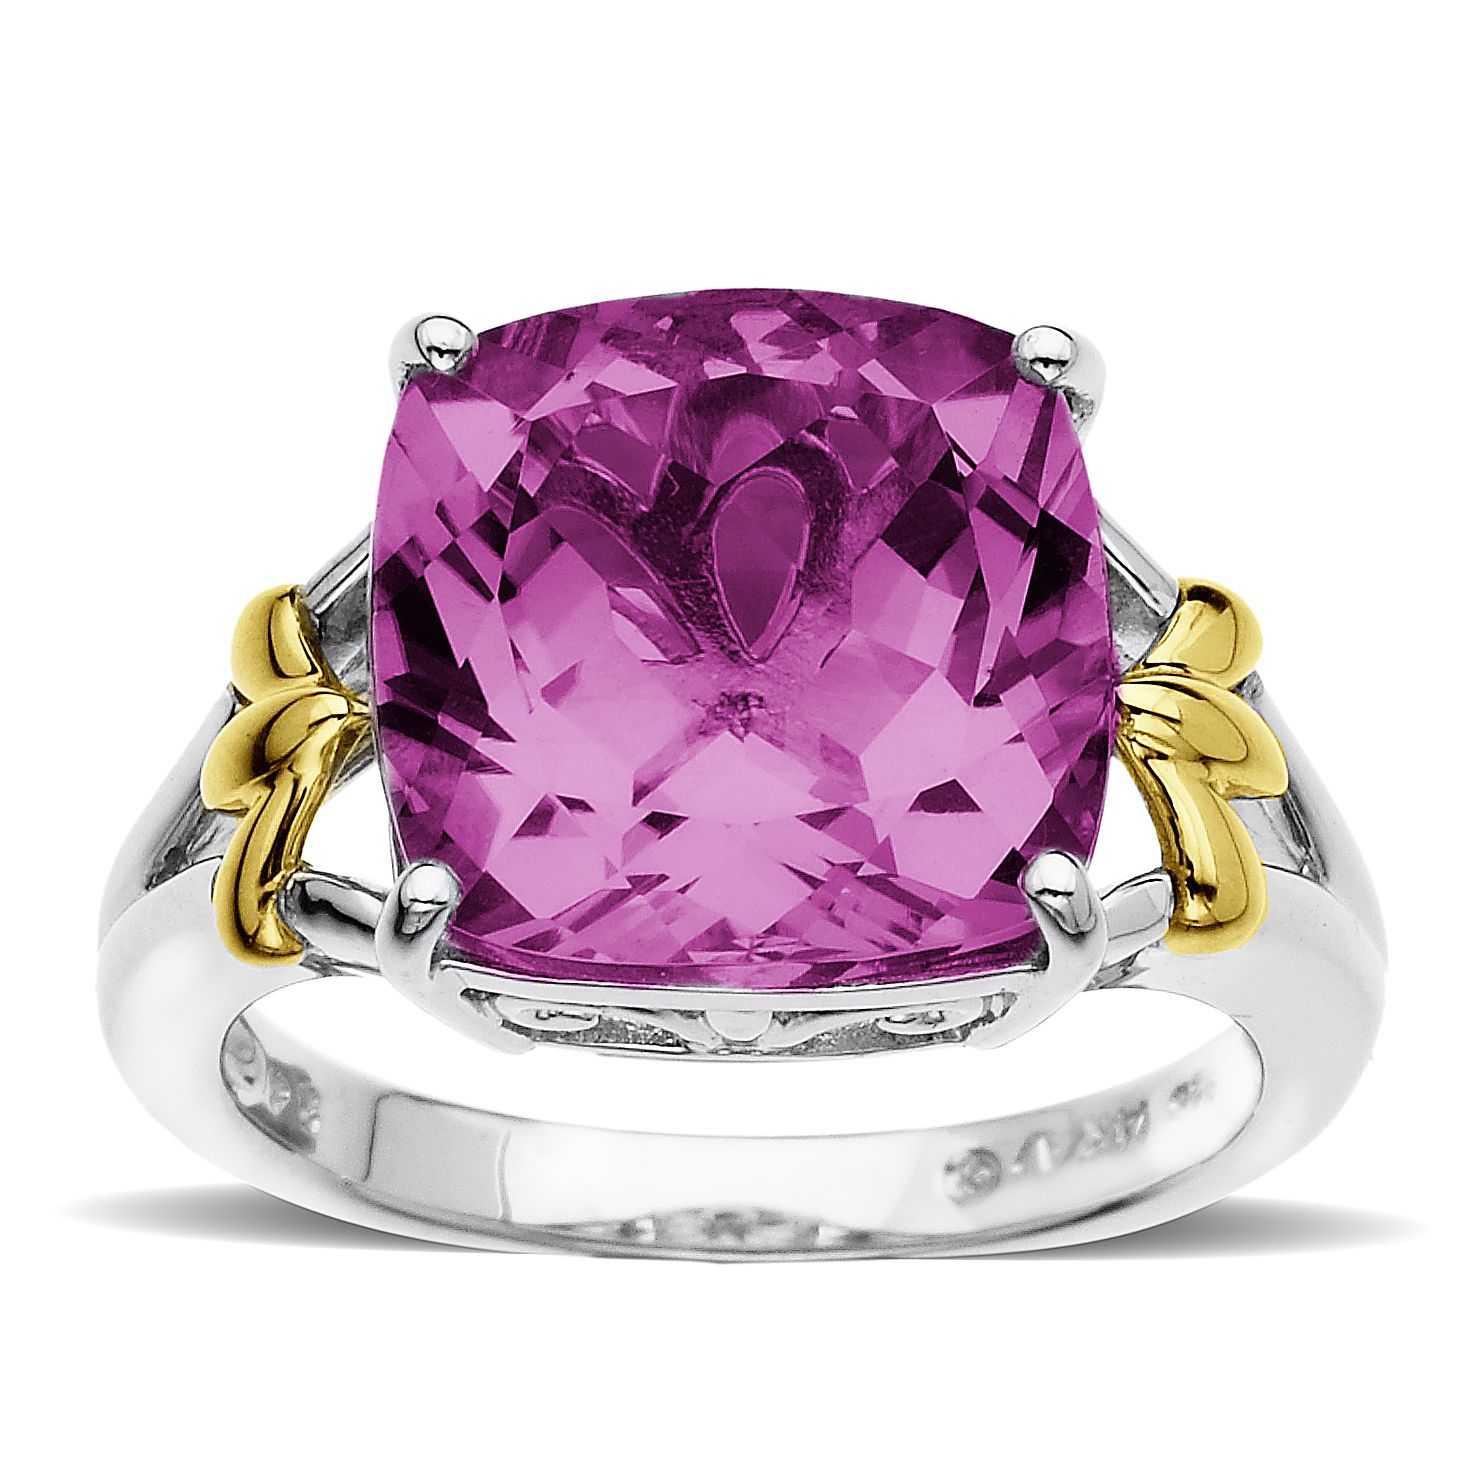 Lab Created Pink Sapphire Ring. 14k Yellow Gold and Sterling Silver_in Size 7